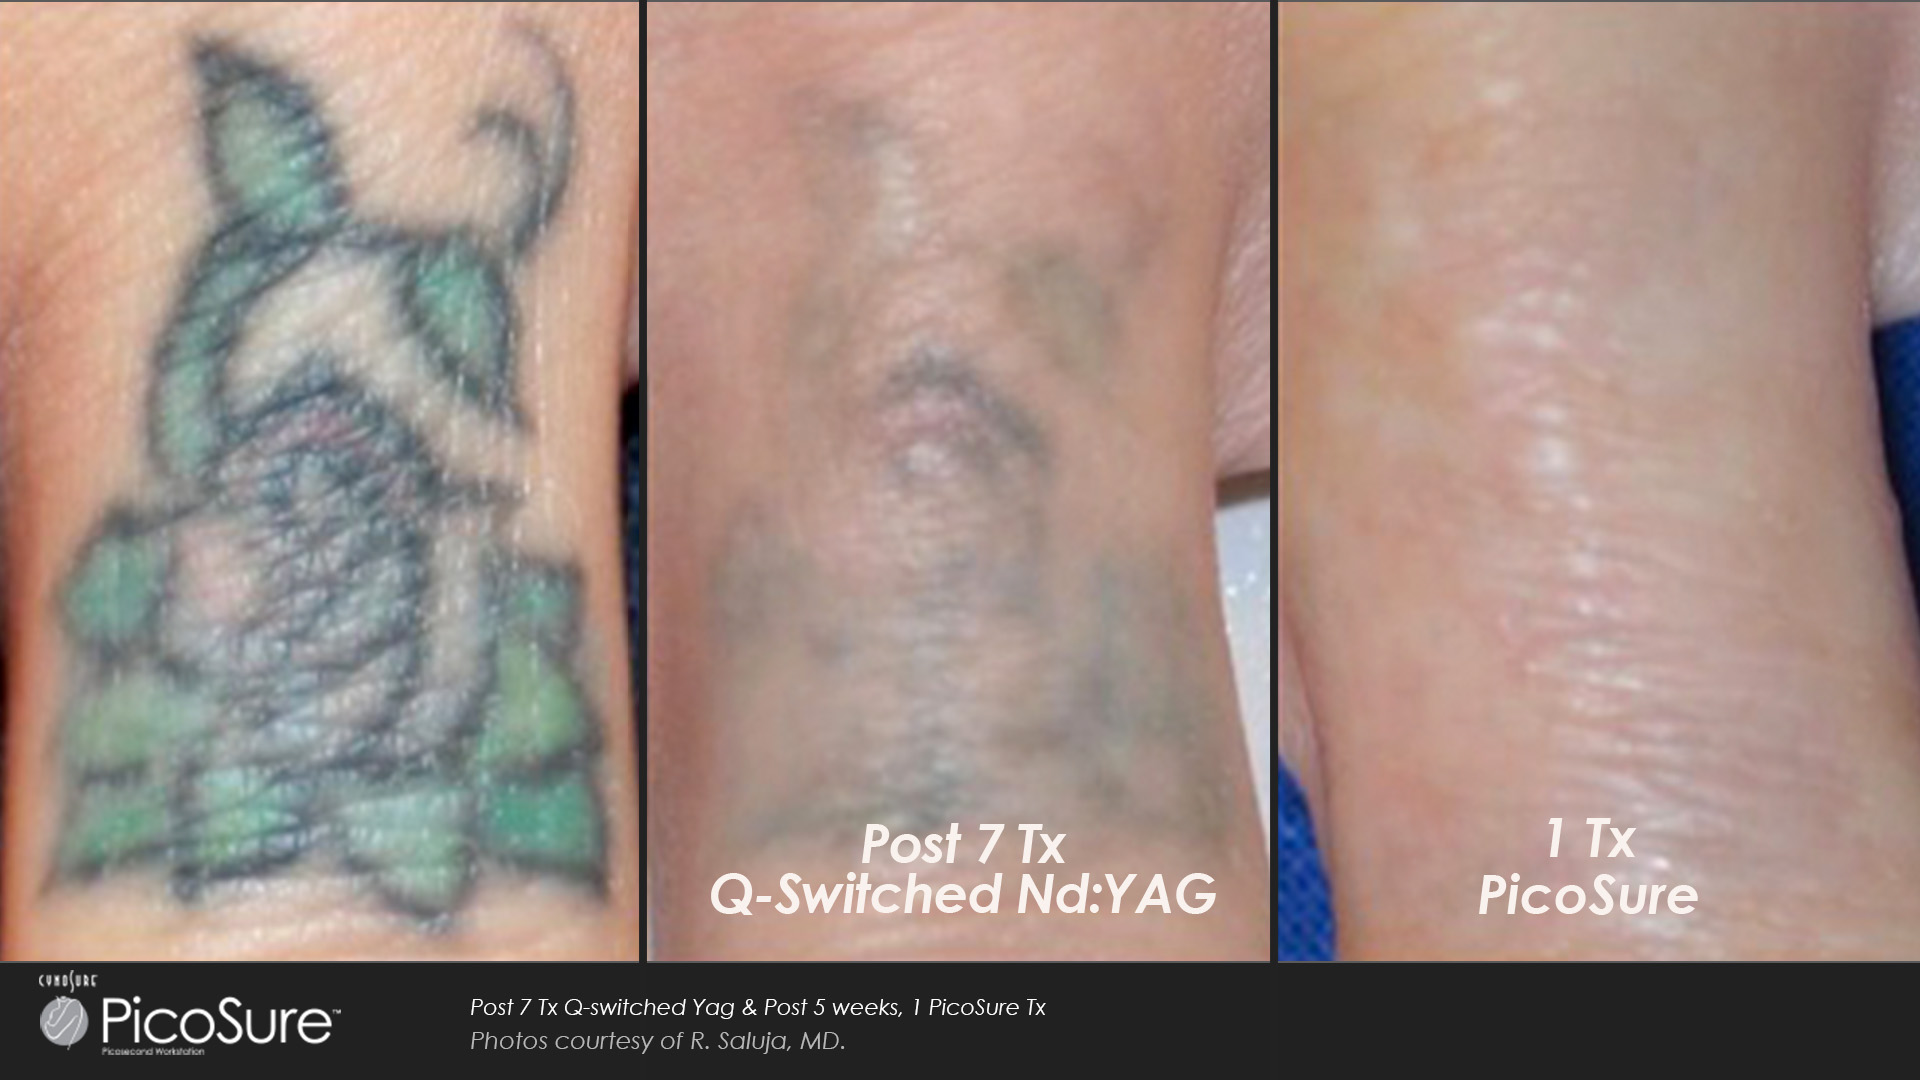 Laser Tattoo Removal with PicoSure Laser Treatment - Epilium & Skin